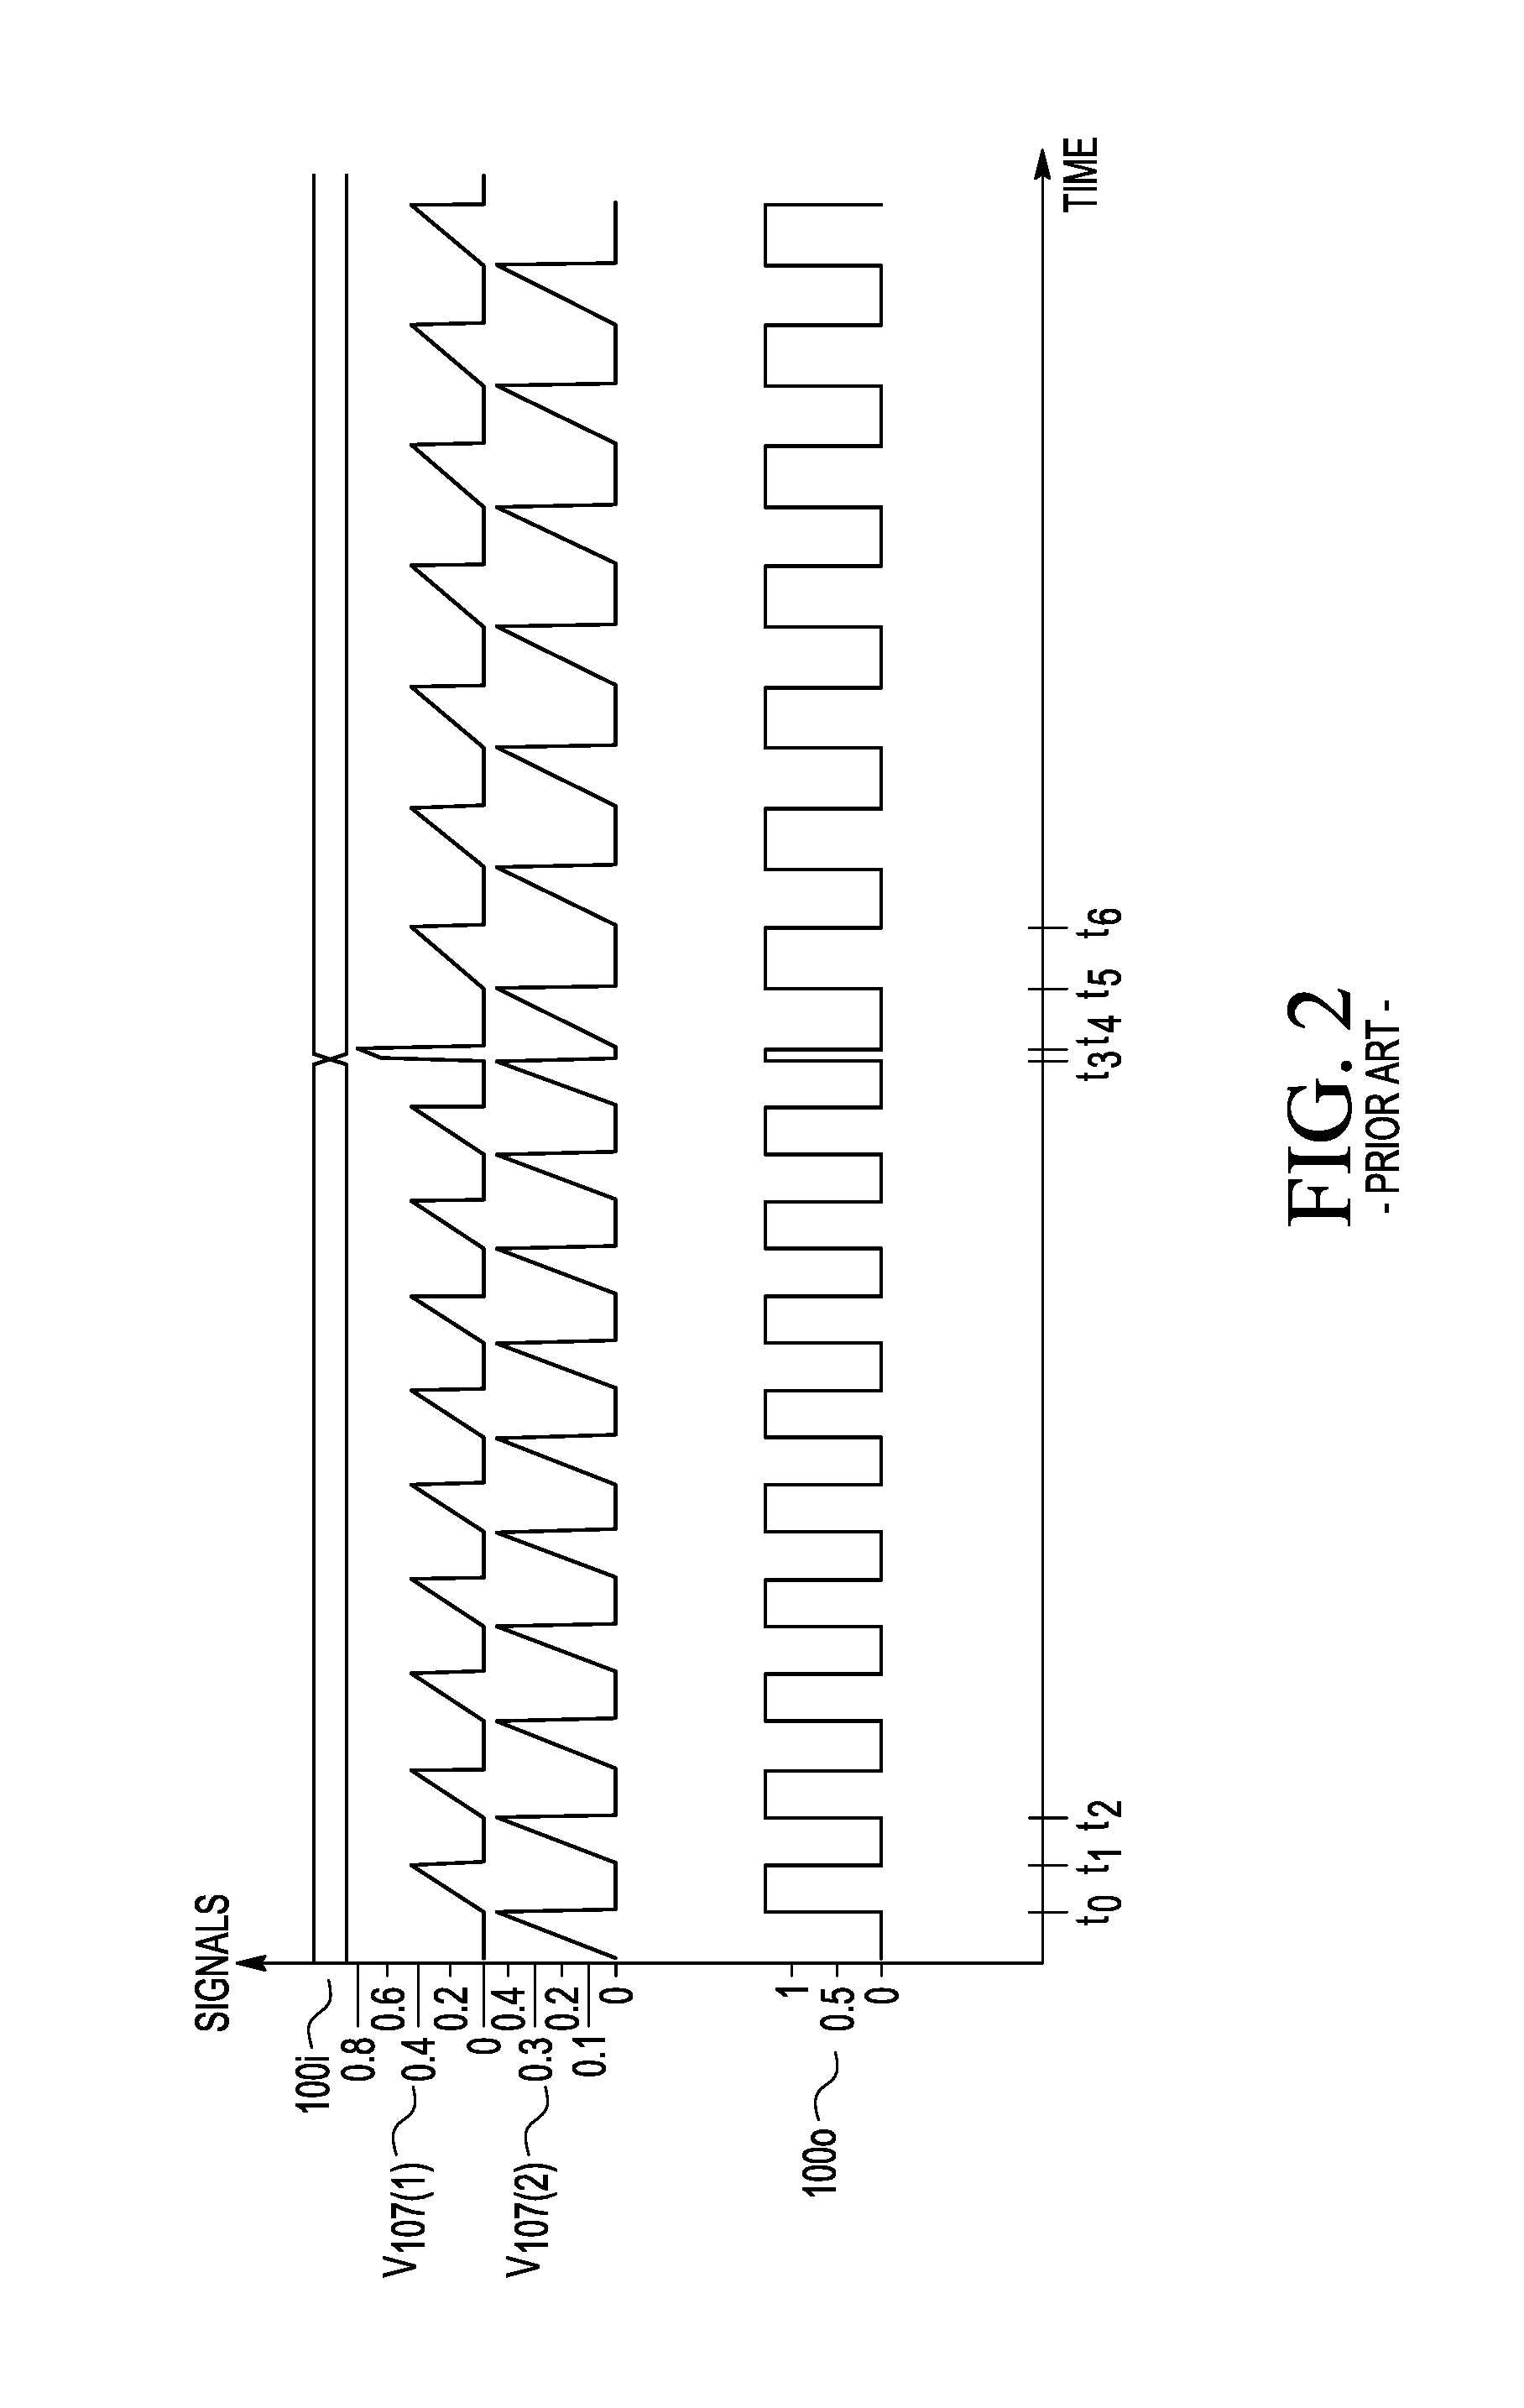 Variable frequency relaxation oscillator